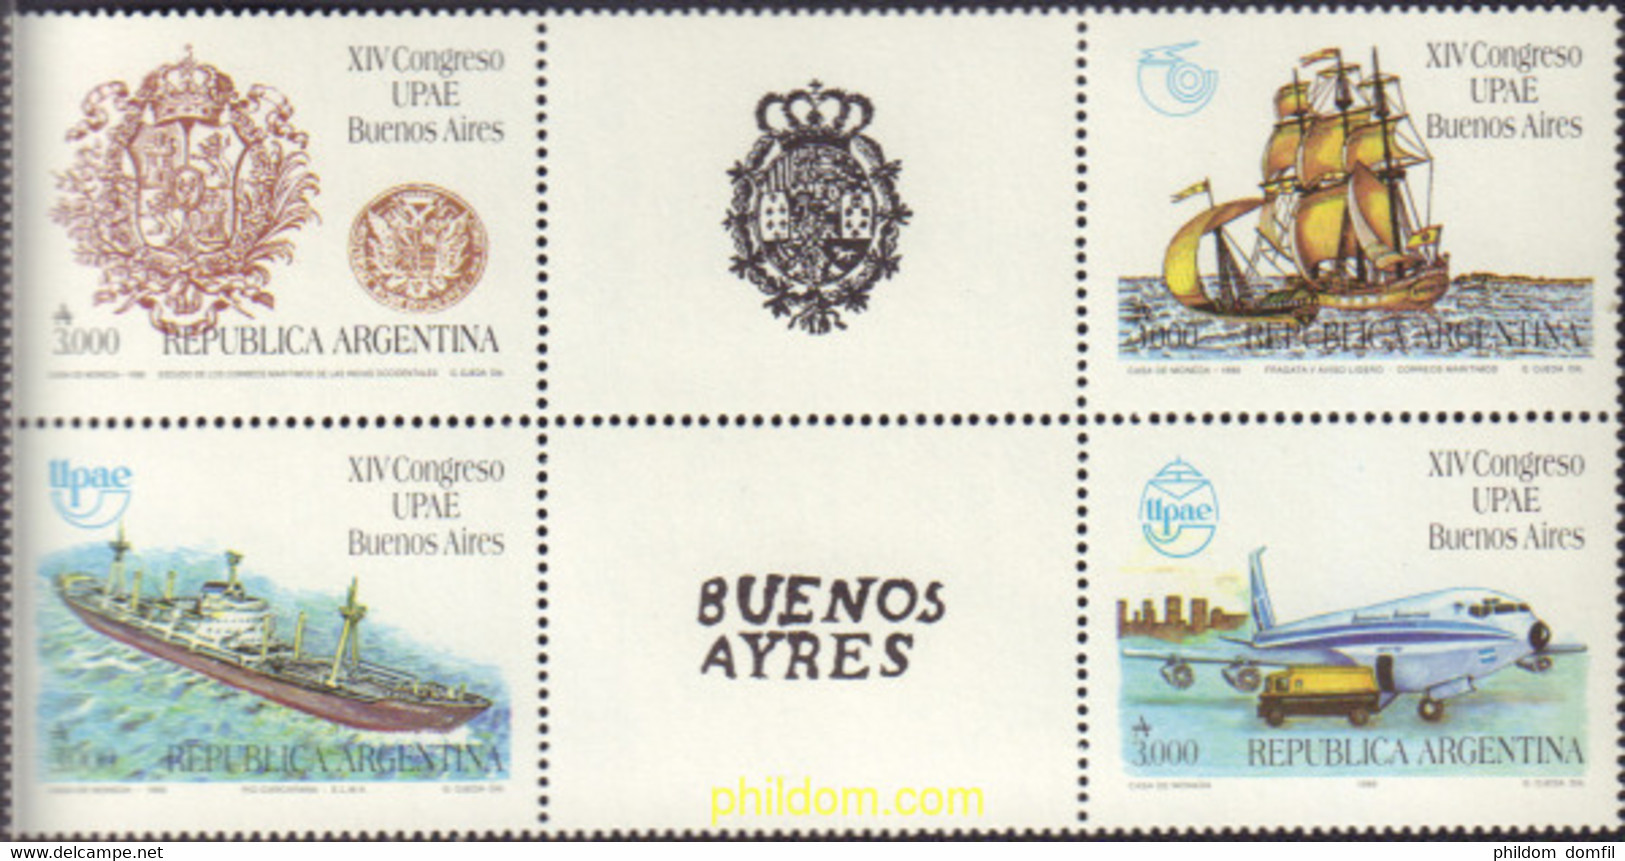 597277 MNH ARGENTINA 1990 XIV CONGRESO DE UPAE EN BUENOS AIRES - Used Stamps